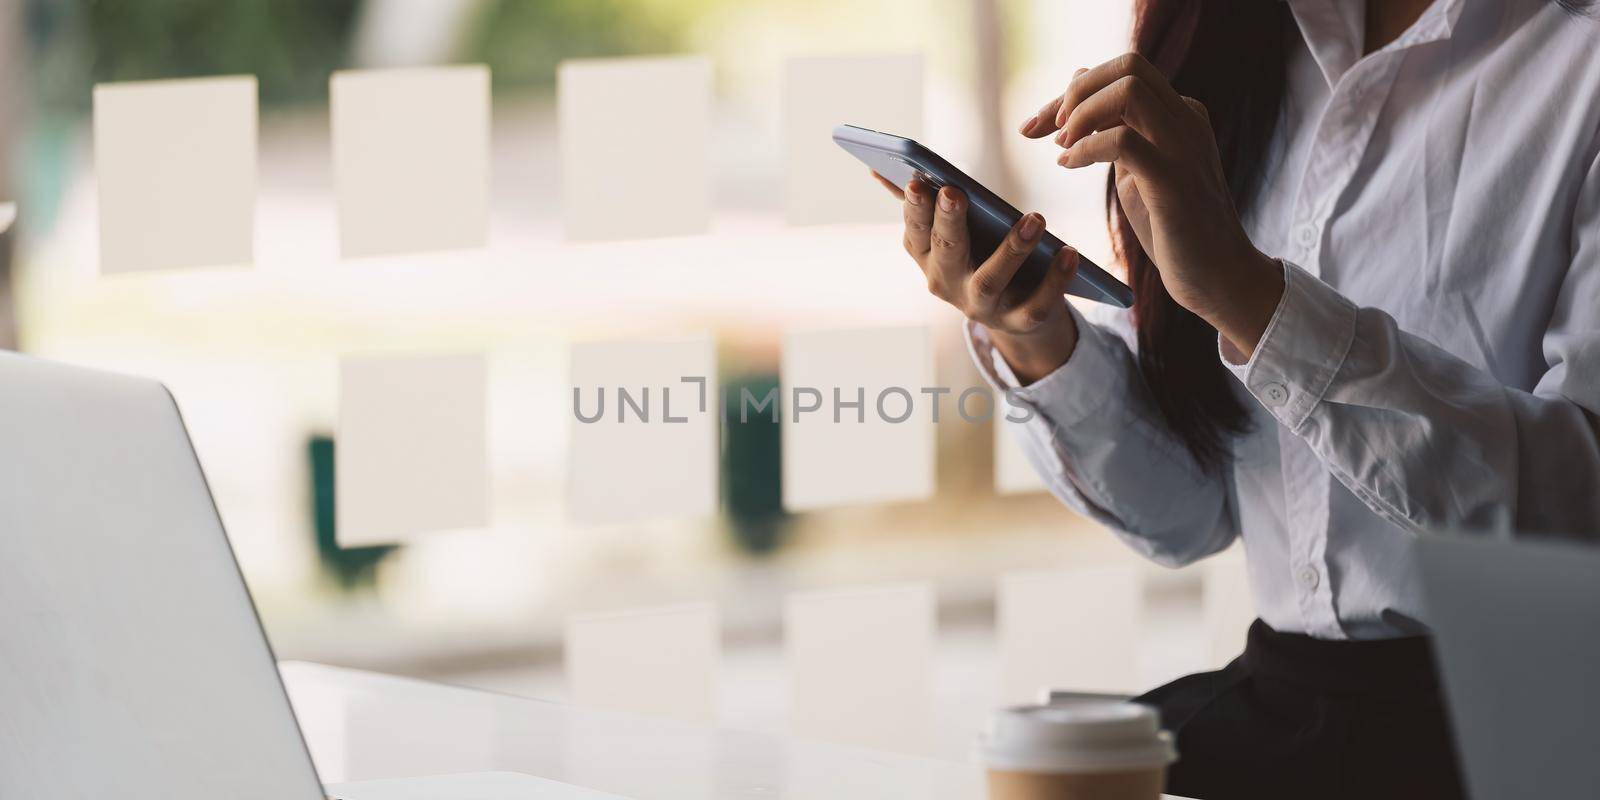 Shot of woman using smart phone at home office.